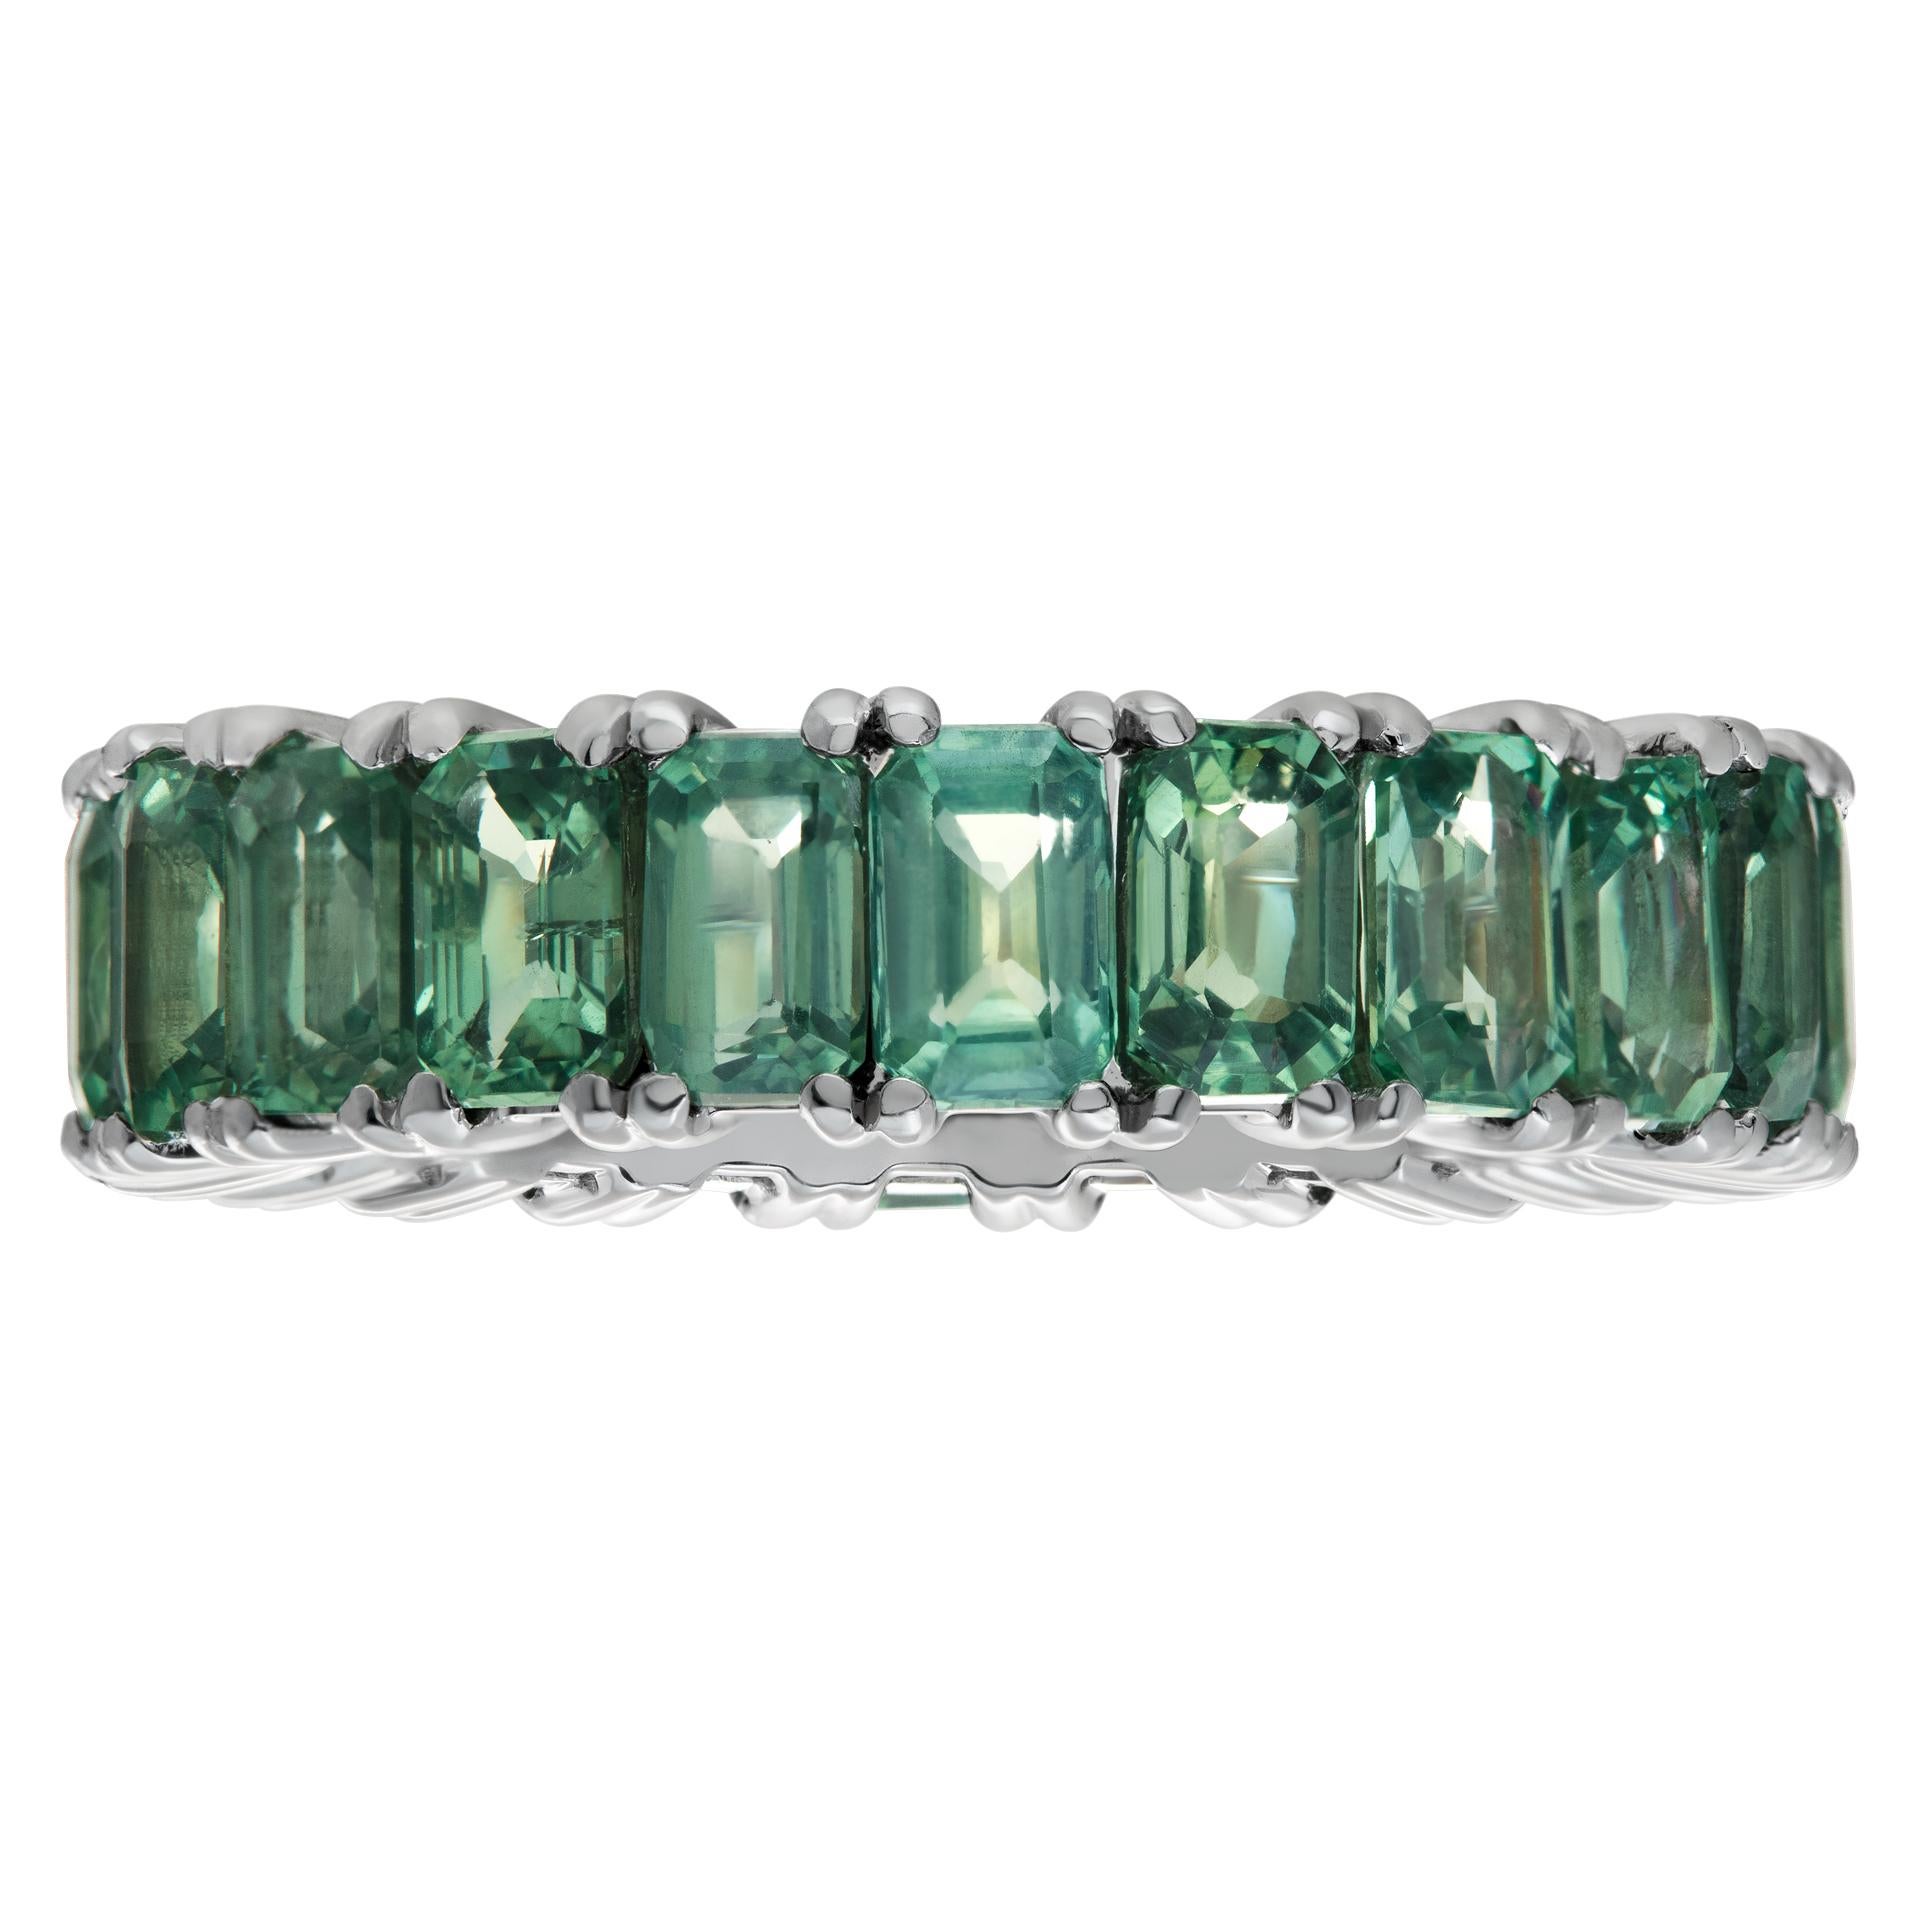 Green sapphire eternity band in 14k white gold, with 8.76 carats in green sapphires. Size 7
